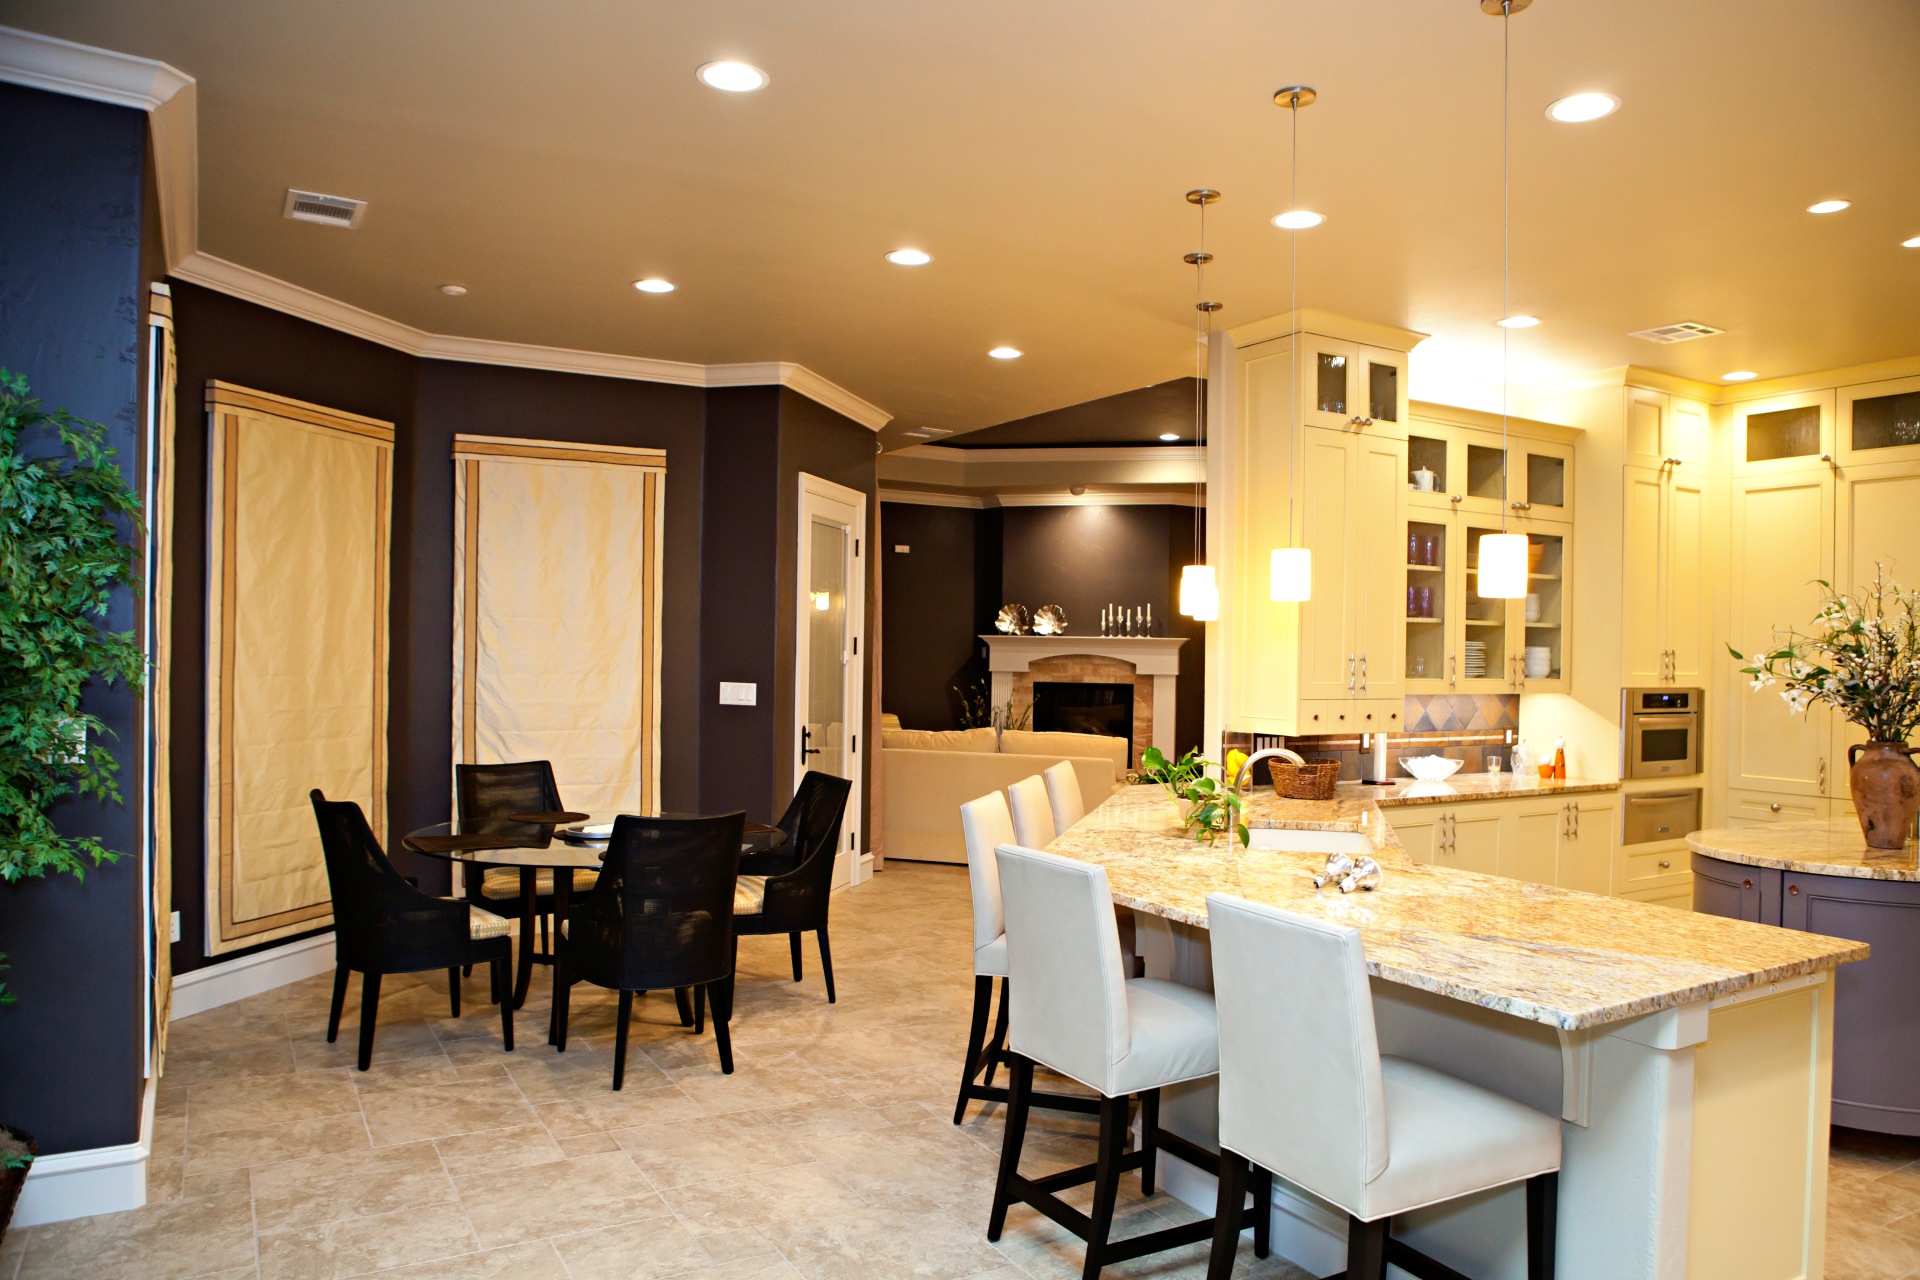 4-seater dining area with 5-seater kitchen countertop